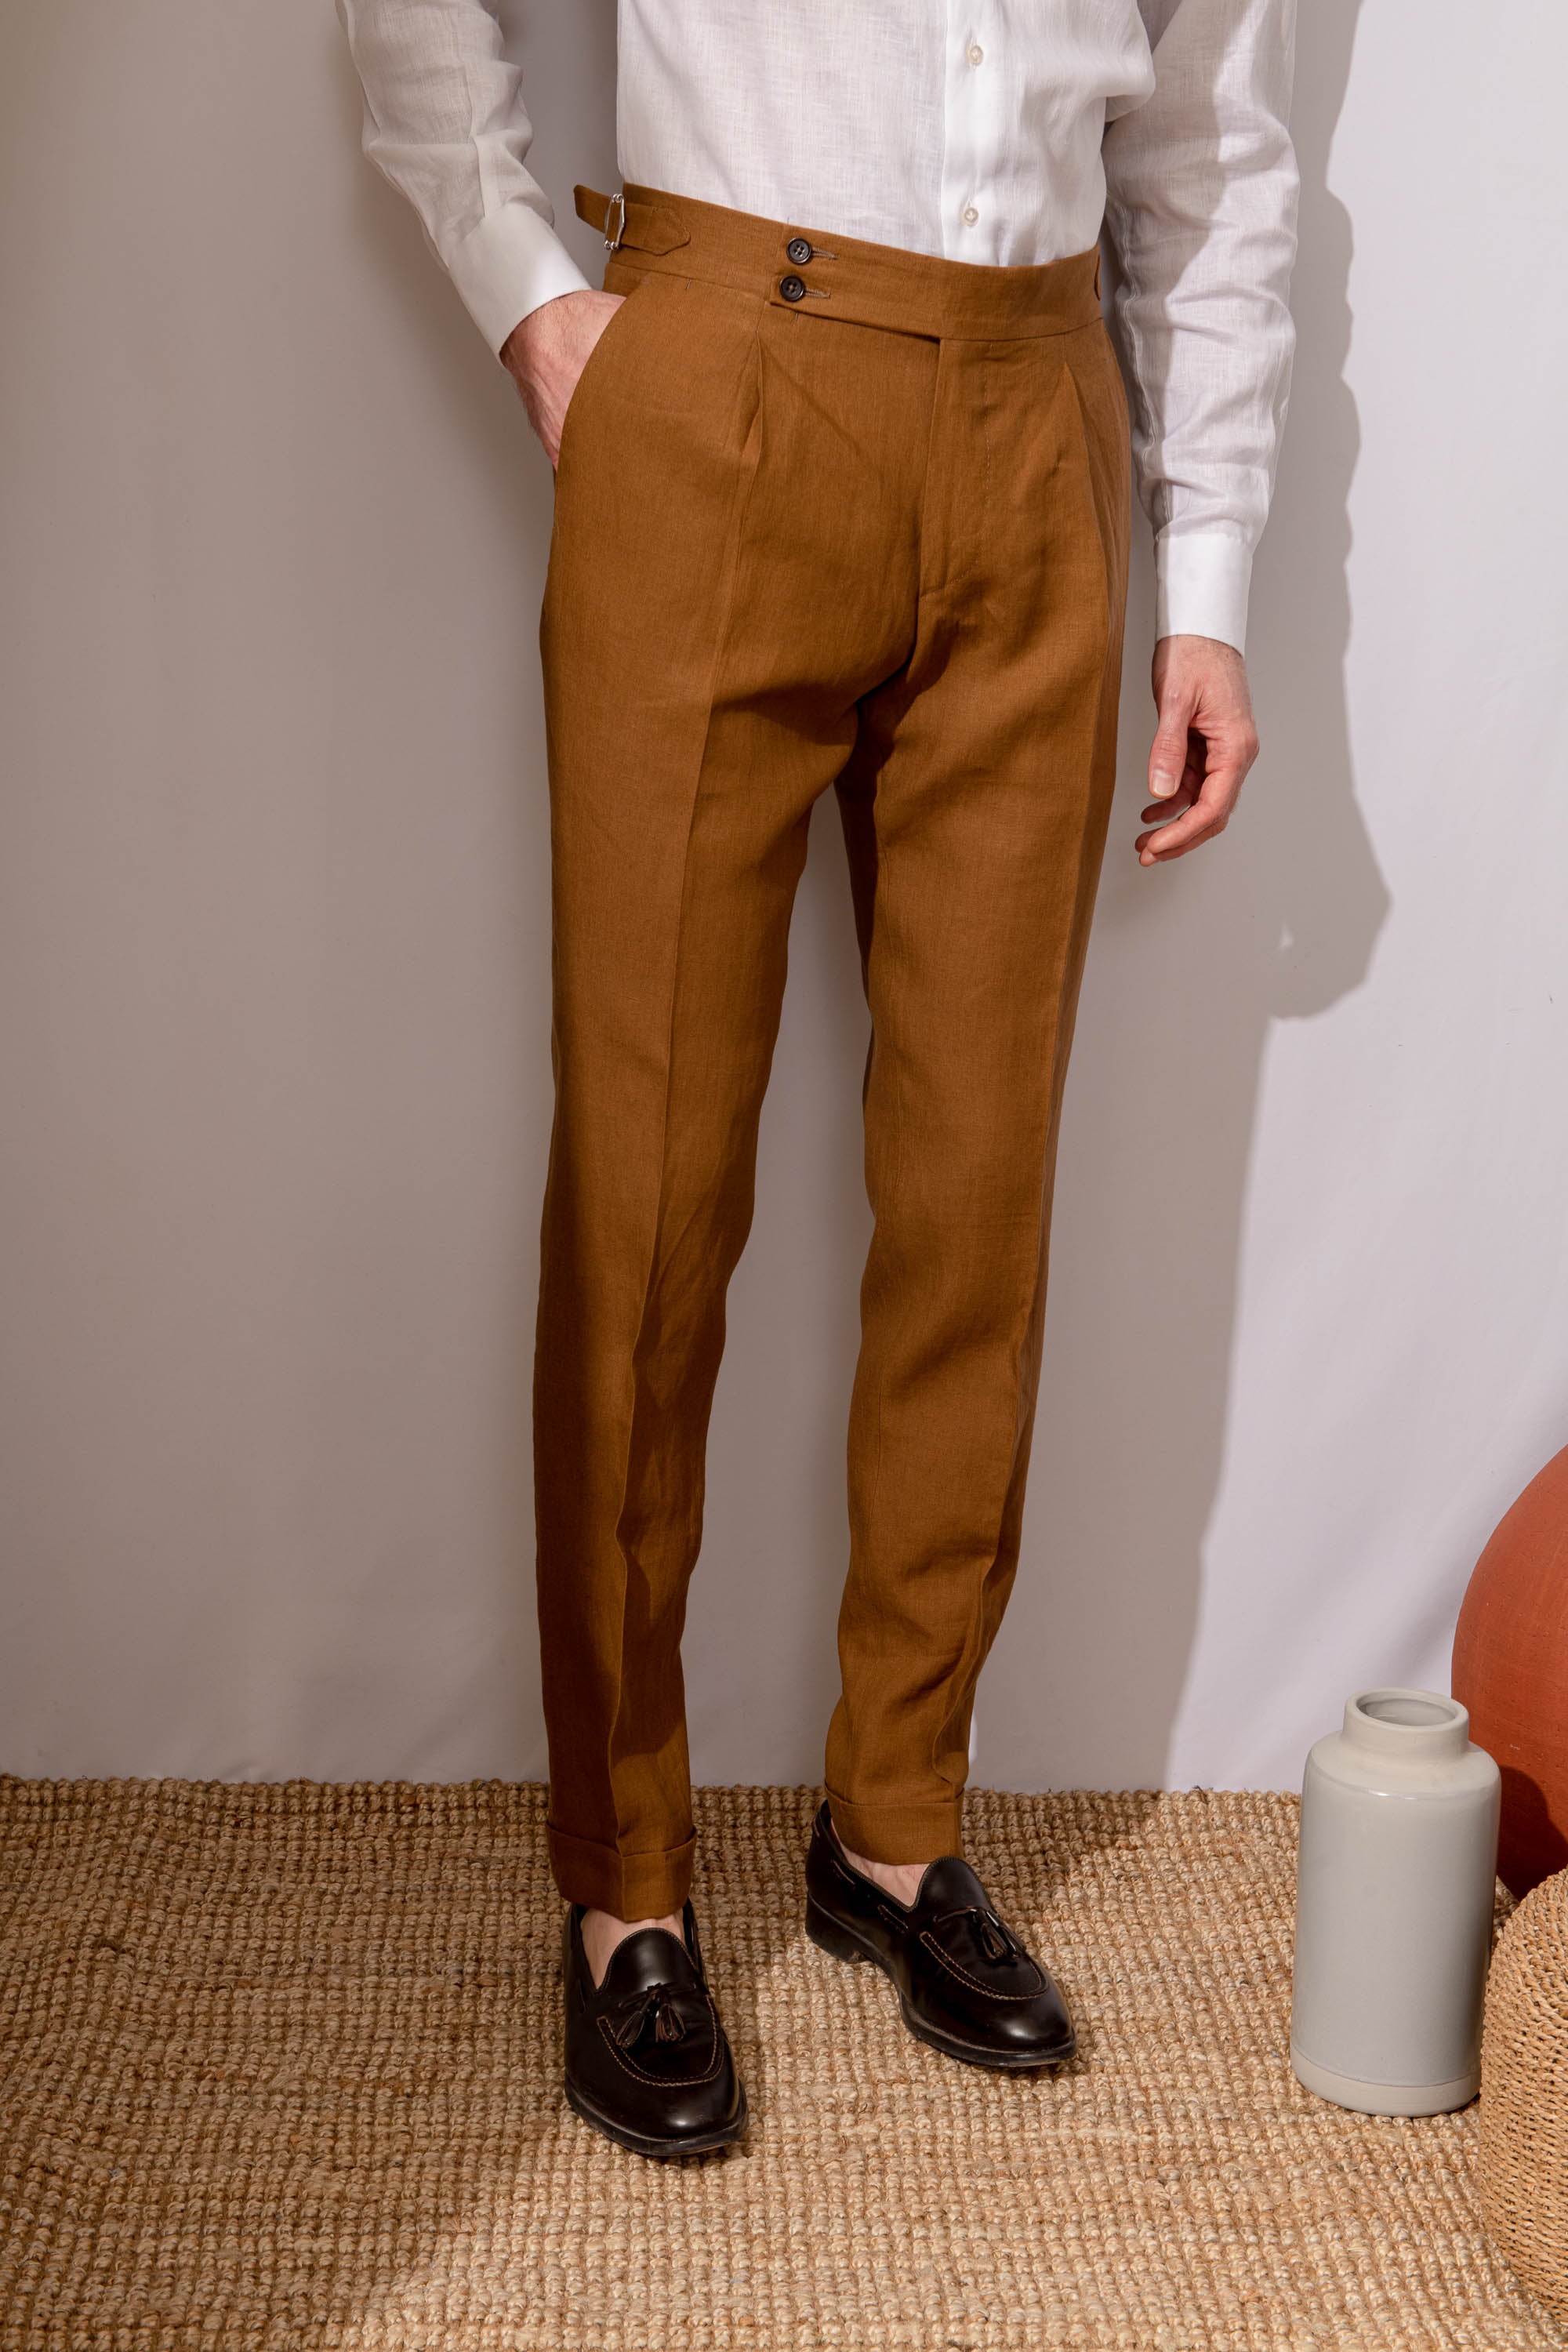 Pantaloni in lino Curry " Soragna Capsule Collection" - Made in Italy